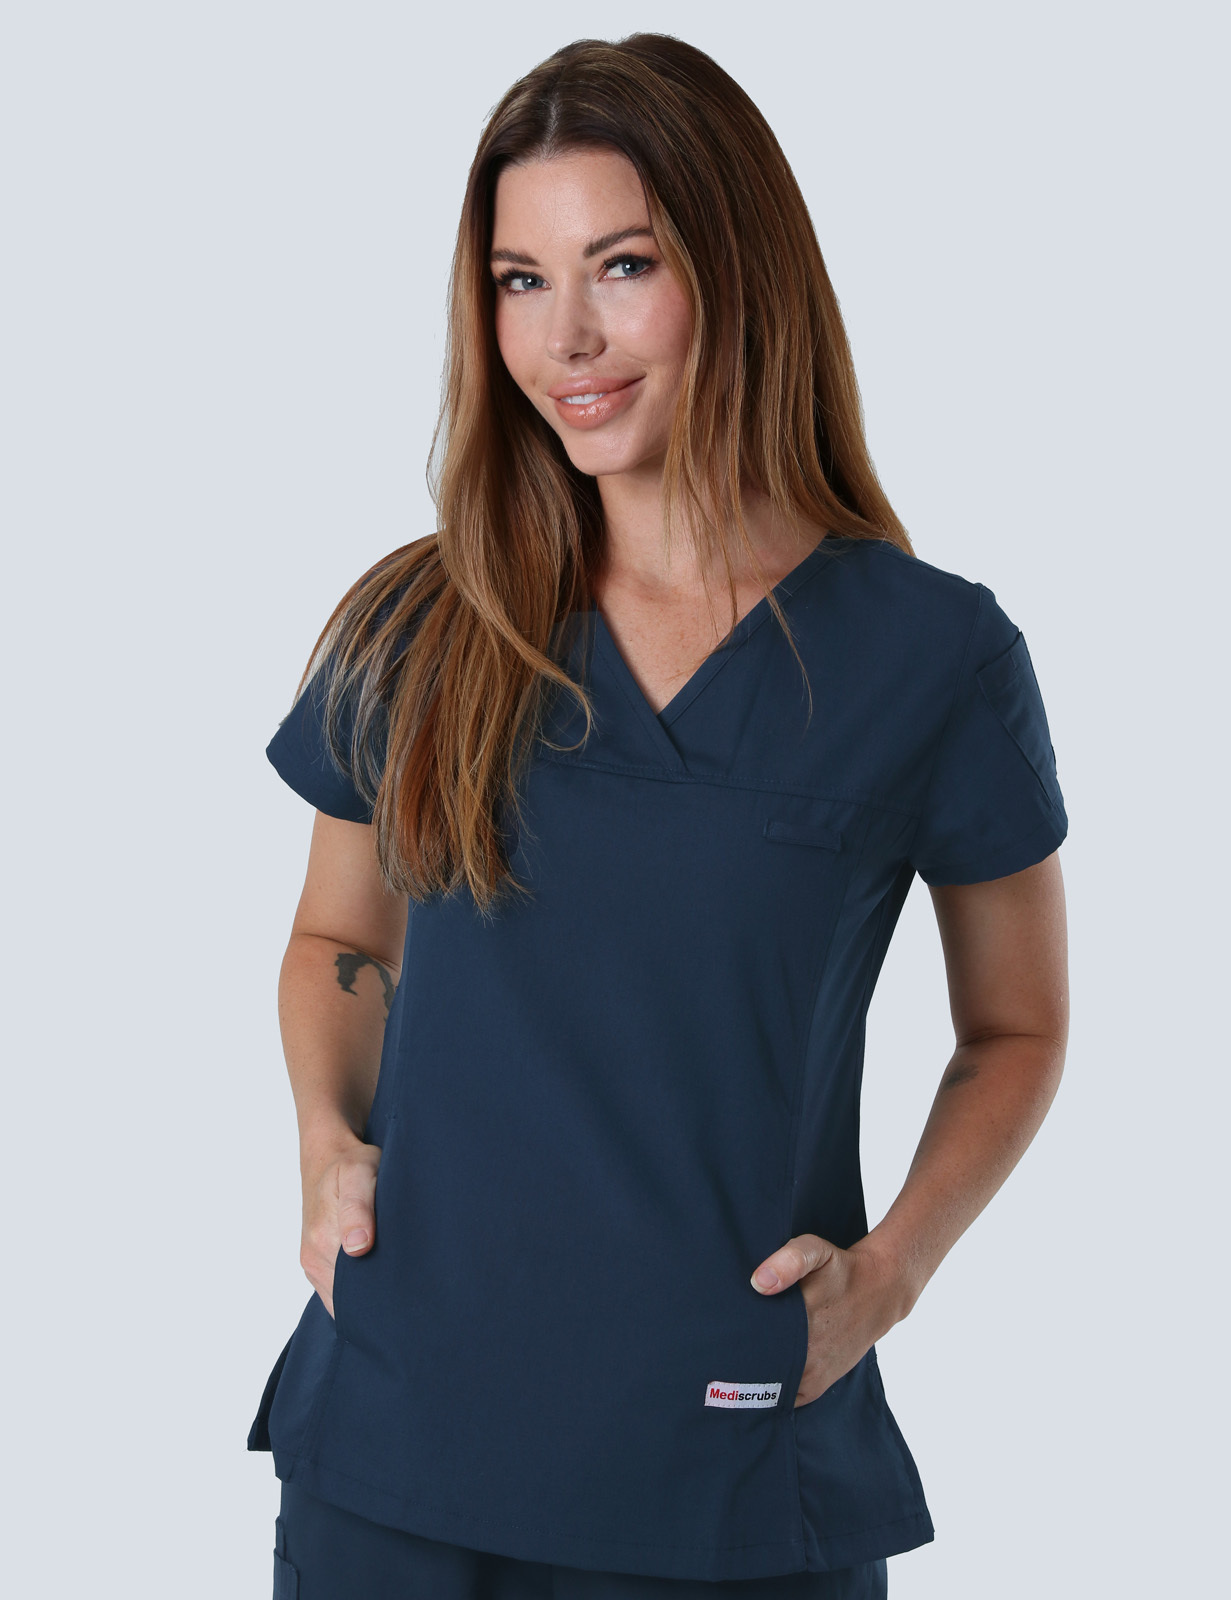 Hobart Hospital - ED RN (Women's Fit Solid Scrub Top and Cargo Pants in Navy incl Logos)